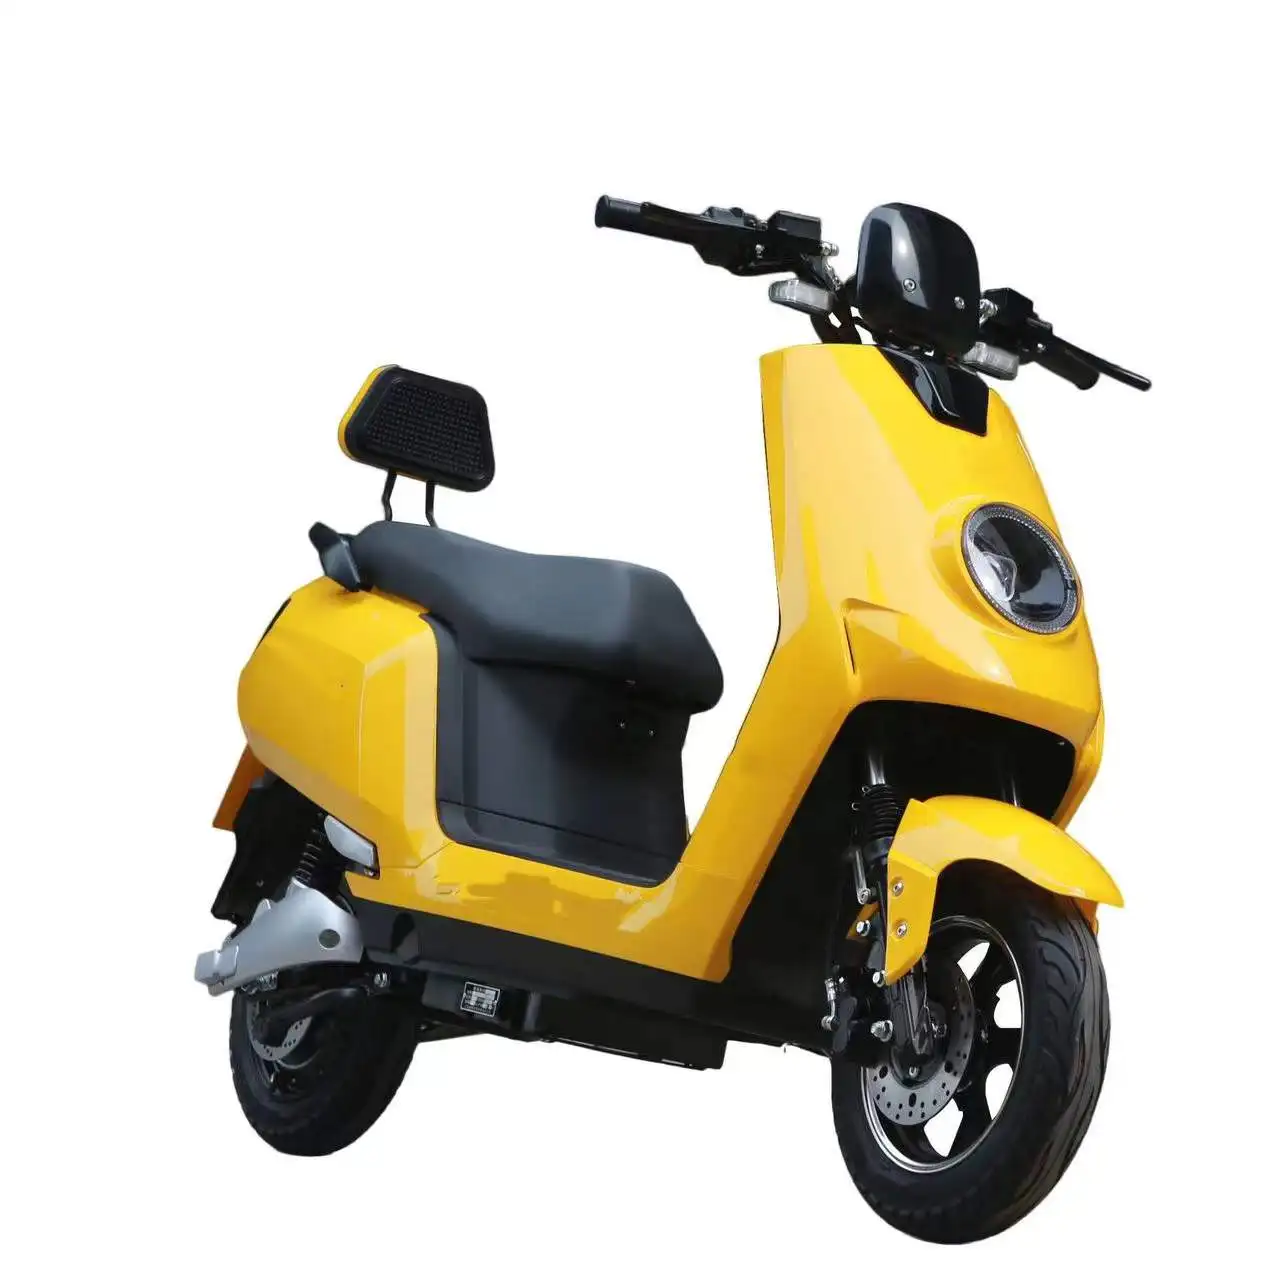 Chinese Classic Motorbikes 2Wheels Gasolines Scooters Street 50Cc 125Cc 150Cc 500Cc Scooter Other Motorcycles Superbike europe classic moped big power 72v 1500w lady electric motorbikes teenager racing electric scooters 2 wheel electric motorcycle